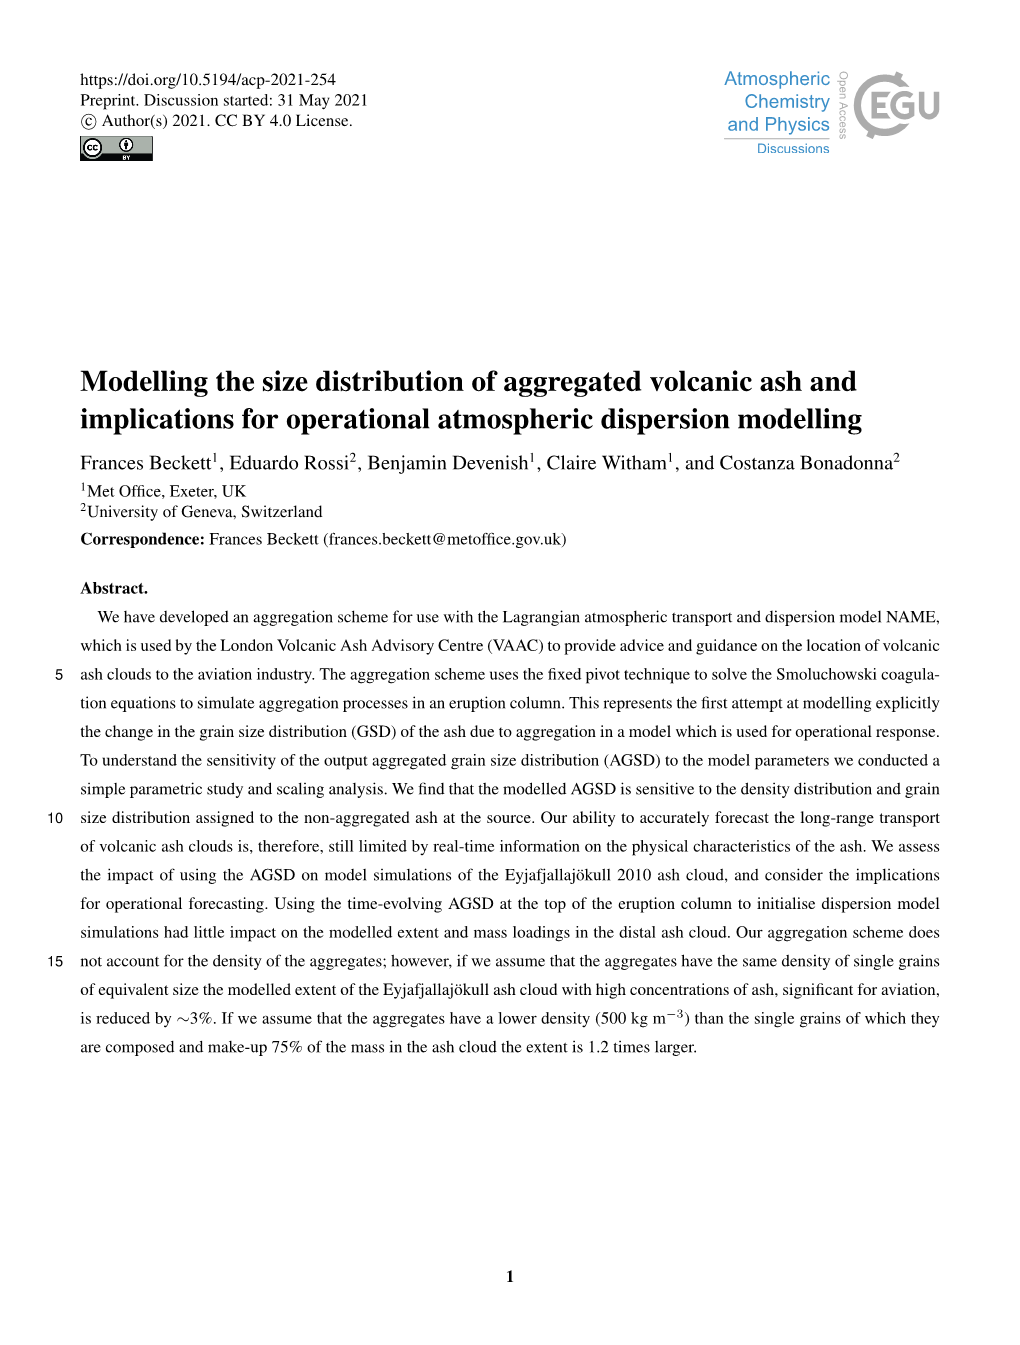 Modelling the Size Distribution of Aggregated Volcanic Ash And